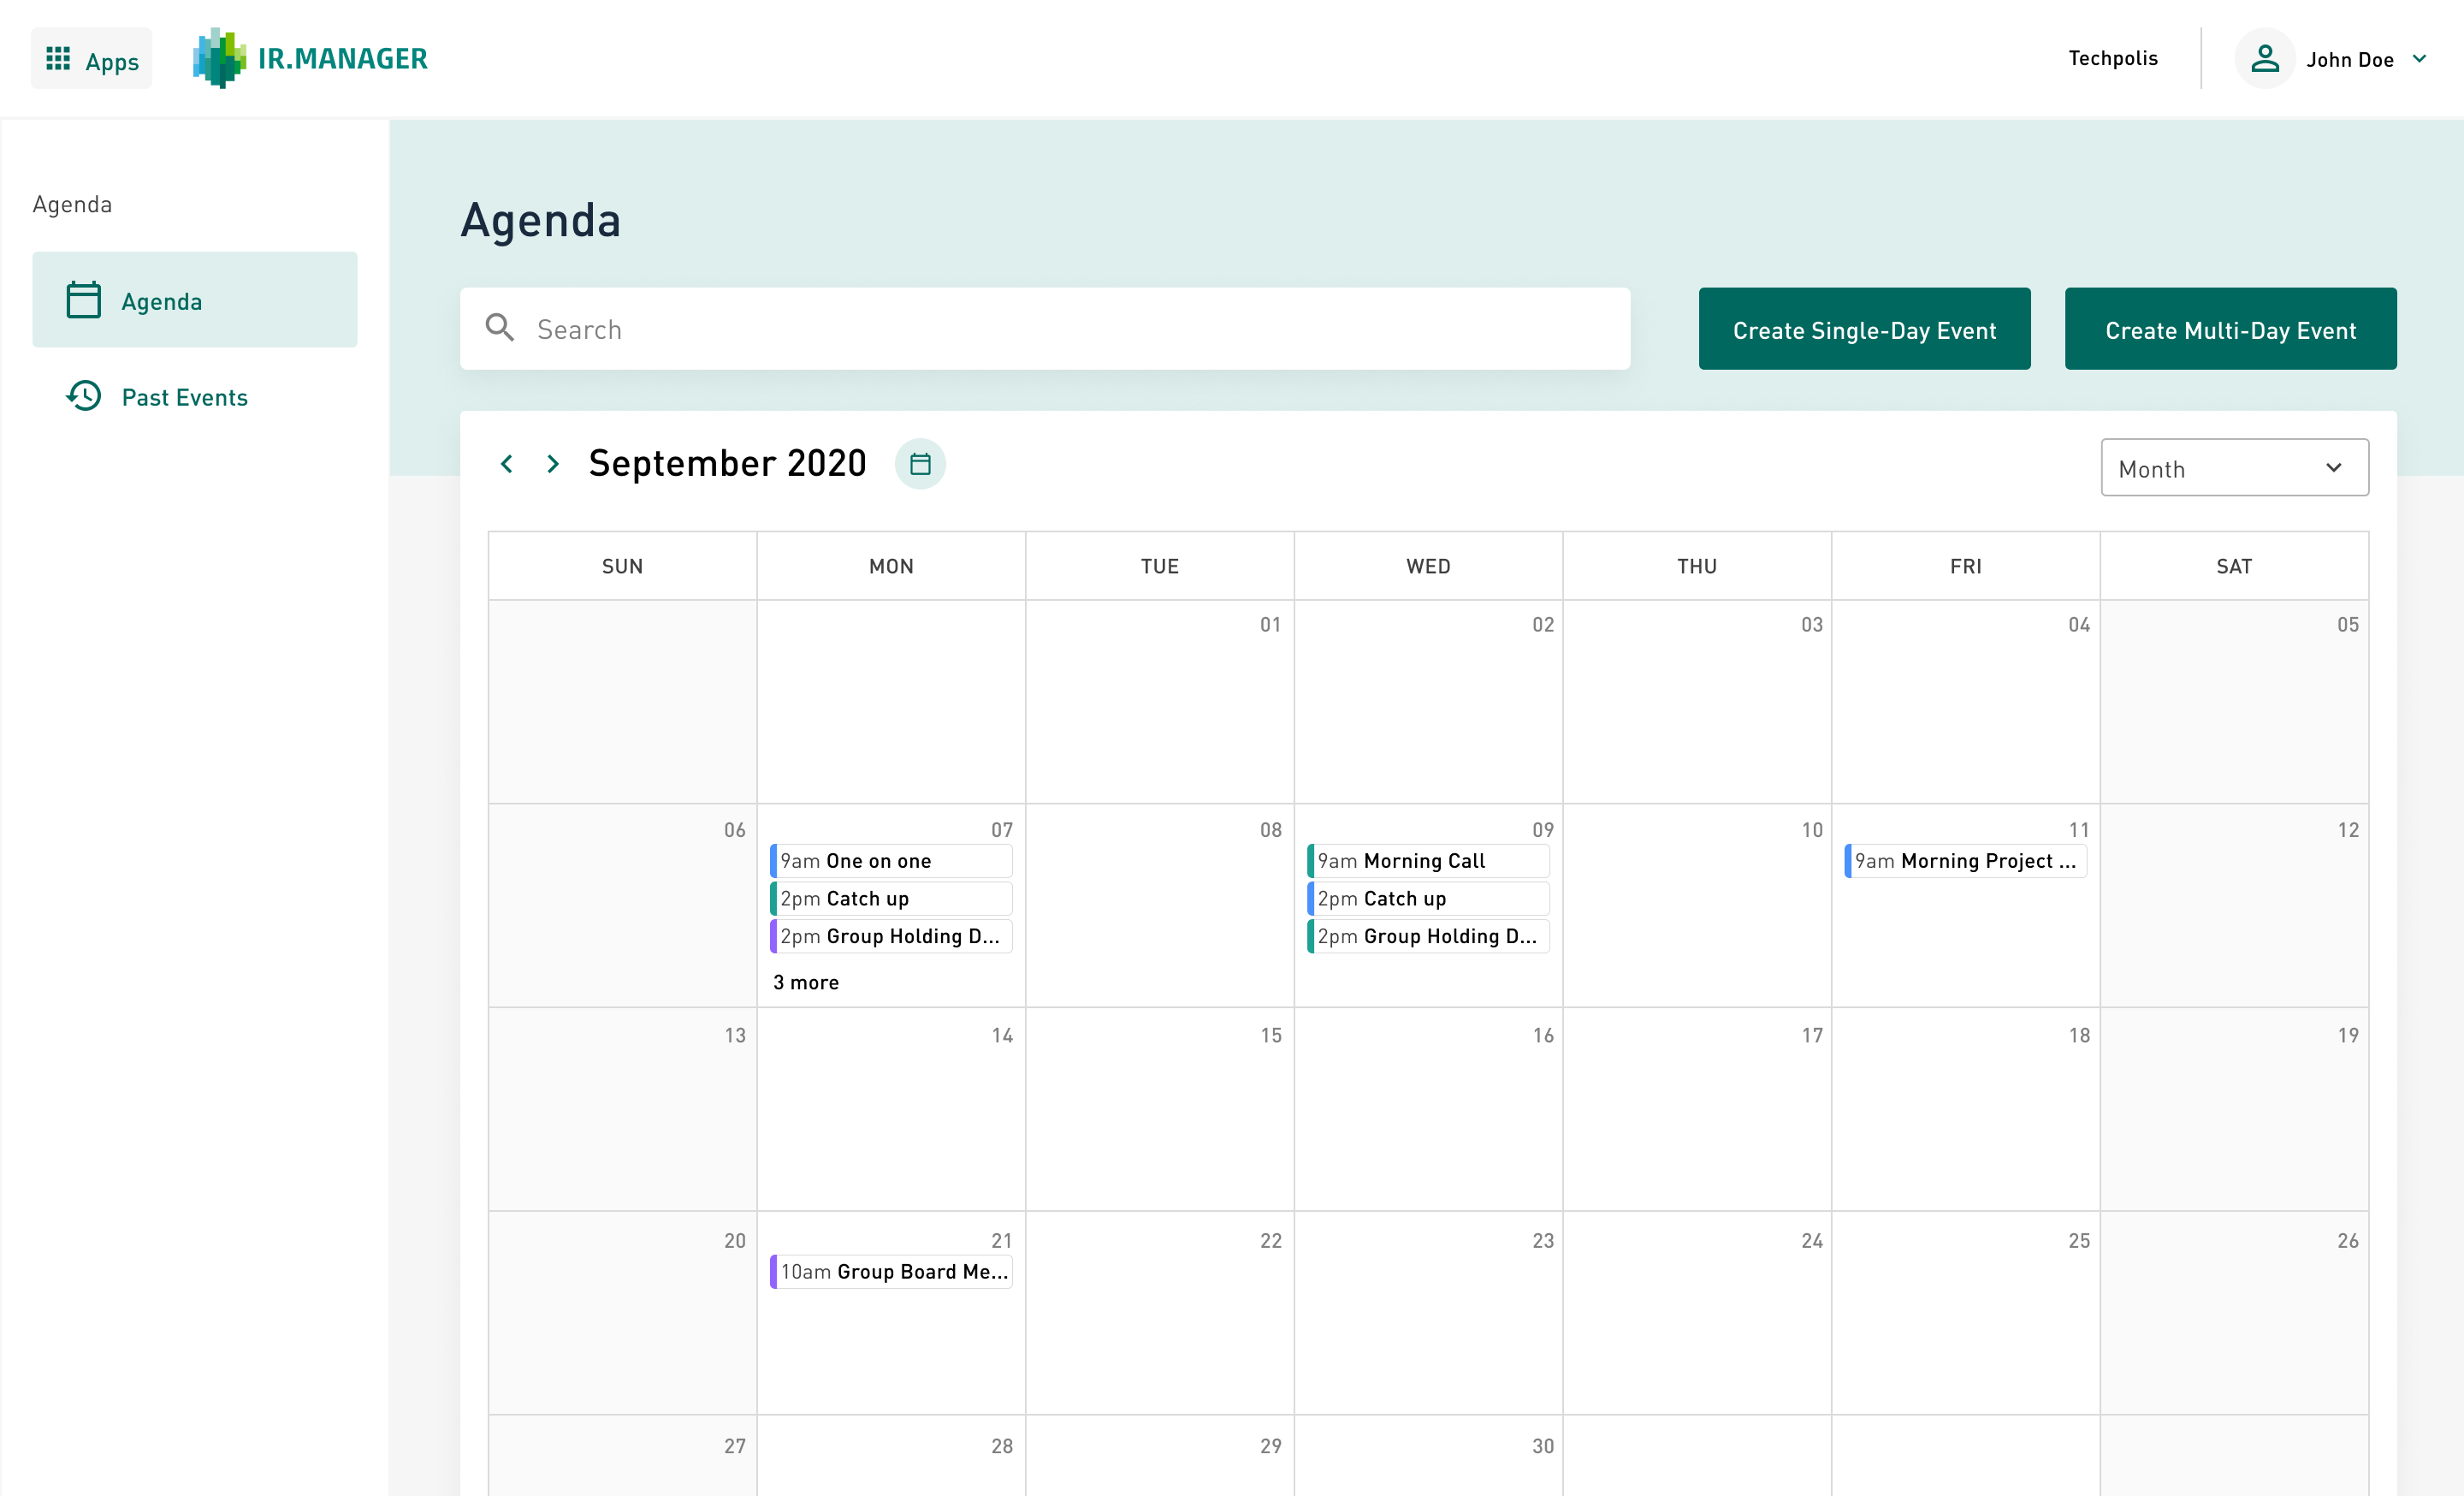 Agenda and calendar page for upcoming meetings and events